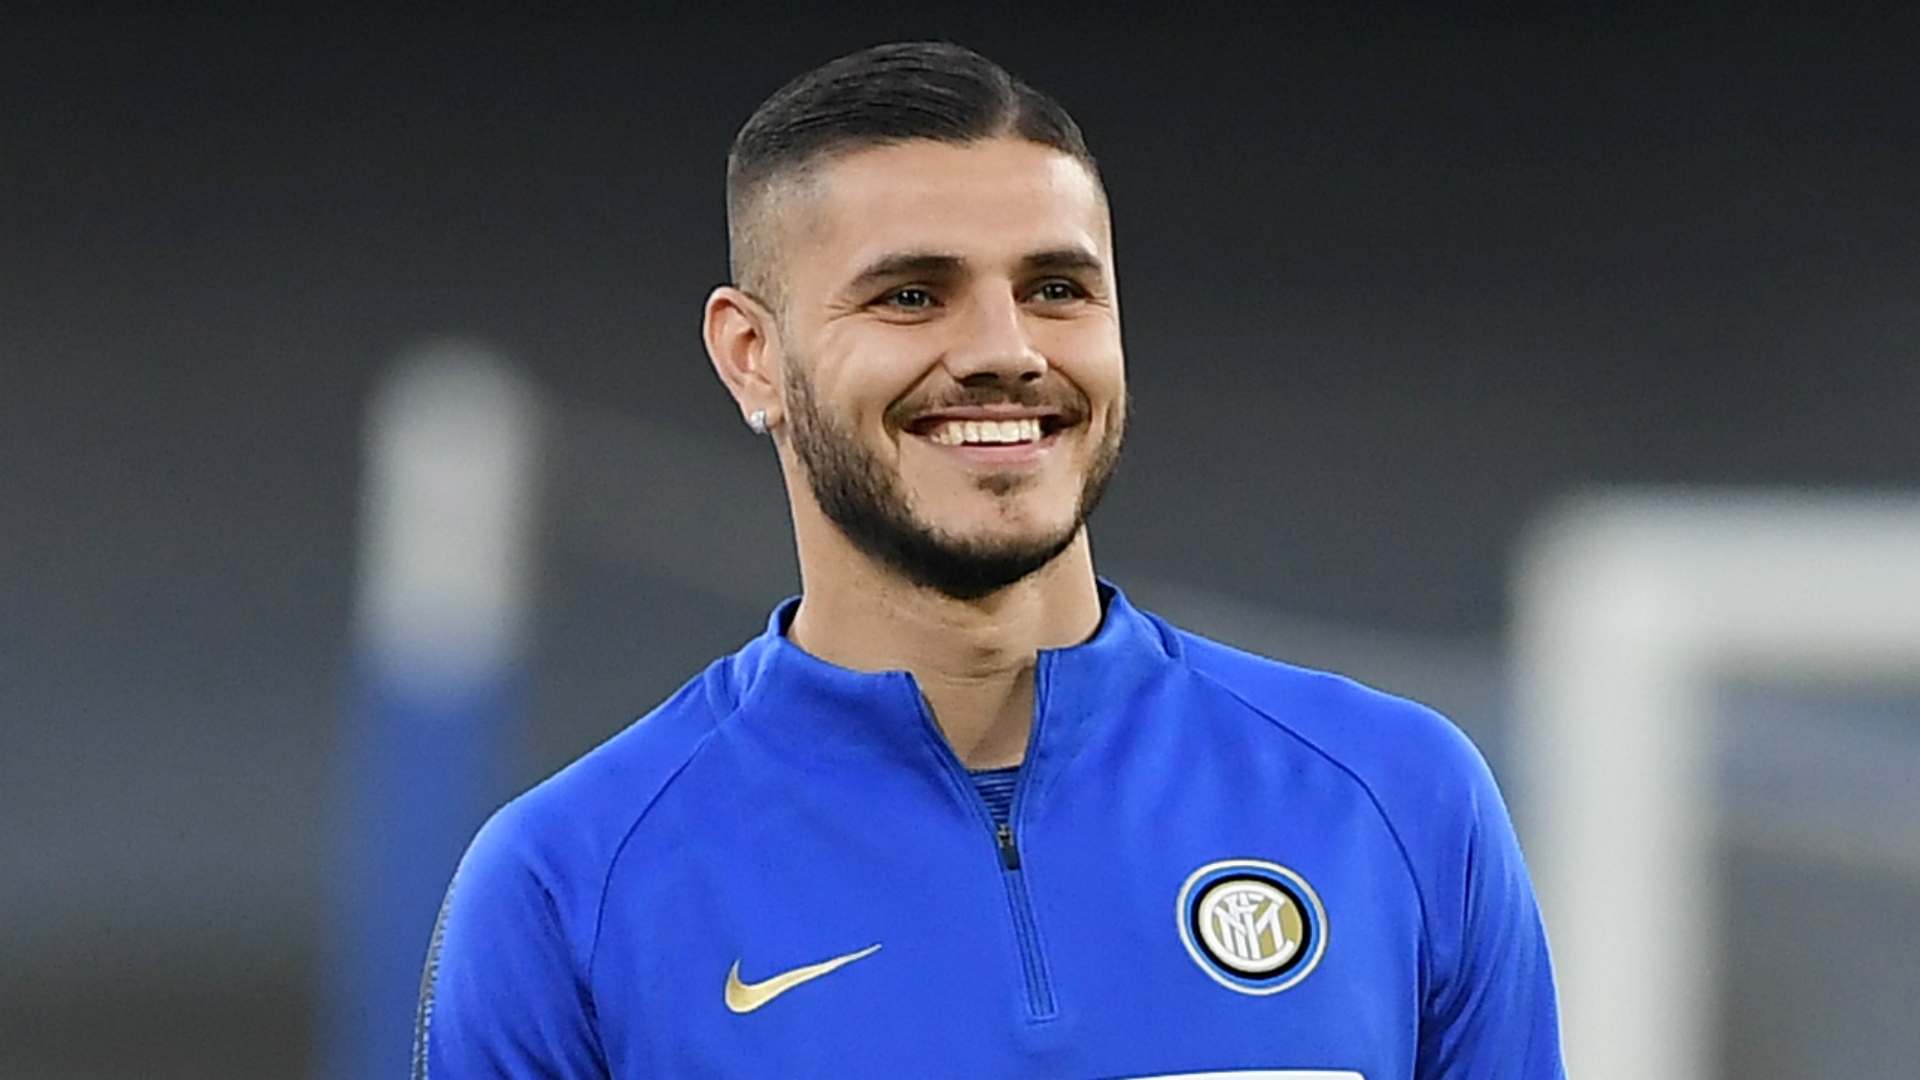 Aurelio De Laurentiis has no issue with Mauro Icardi's call not to join Napoli, insisting he has no regrets after signing Fernando Llorente.